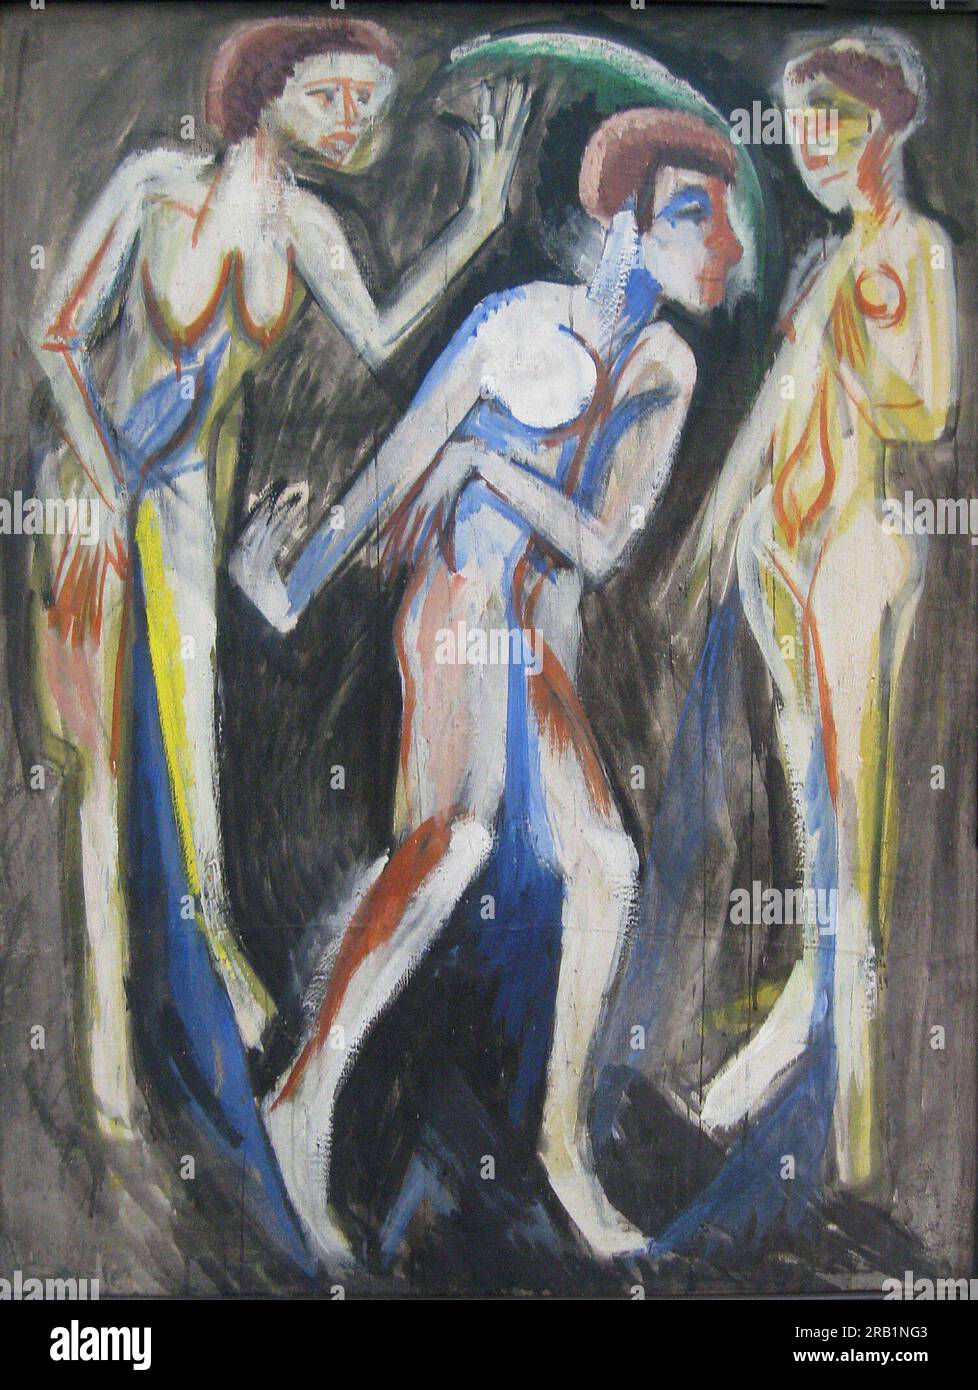 The Dance between the Women 1915 by Ernst Ludwig Kirchner Stock Photo